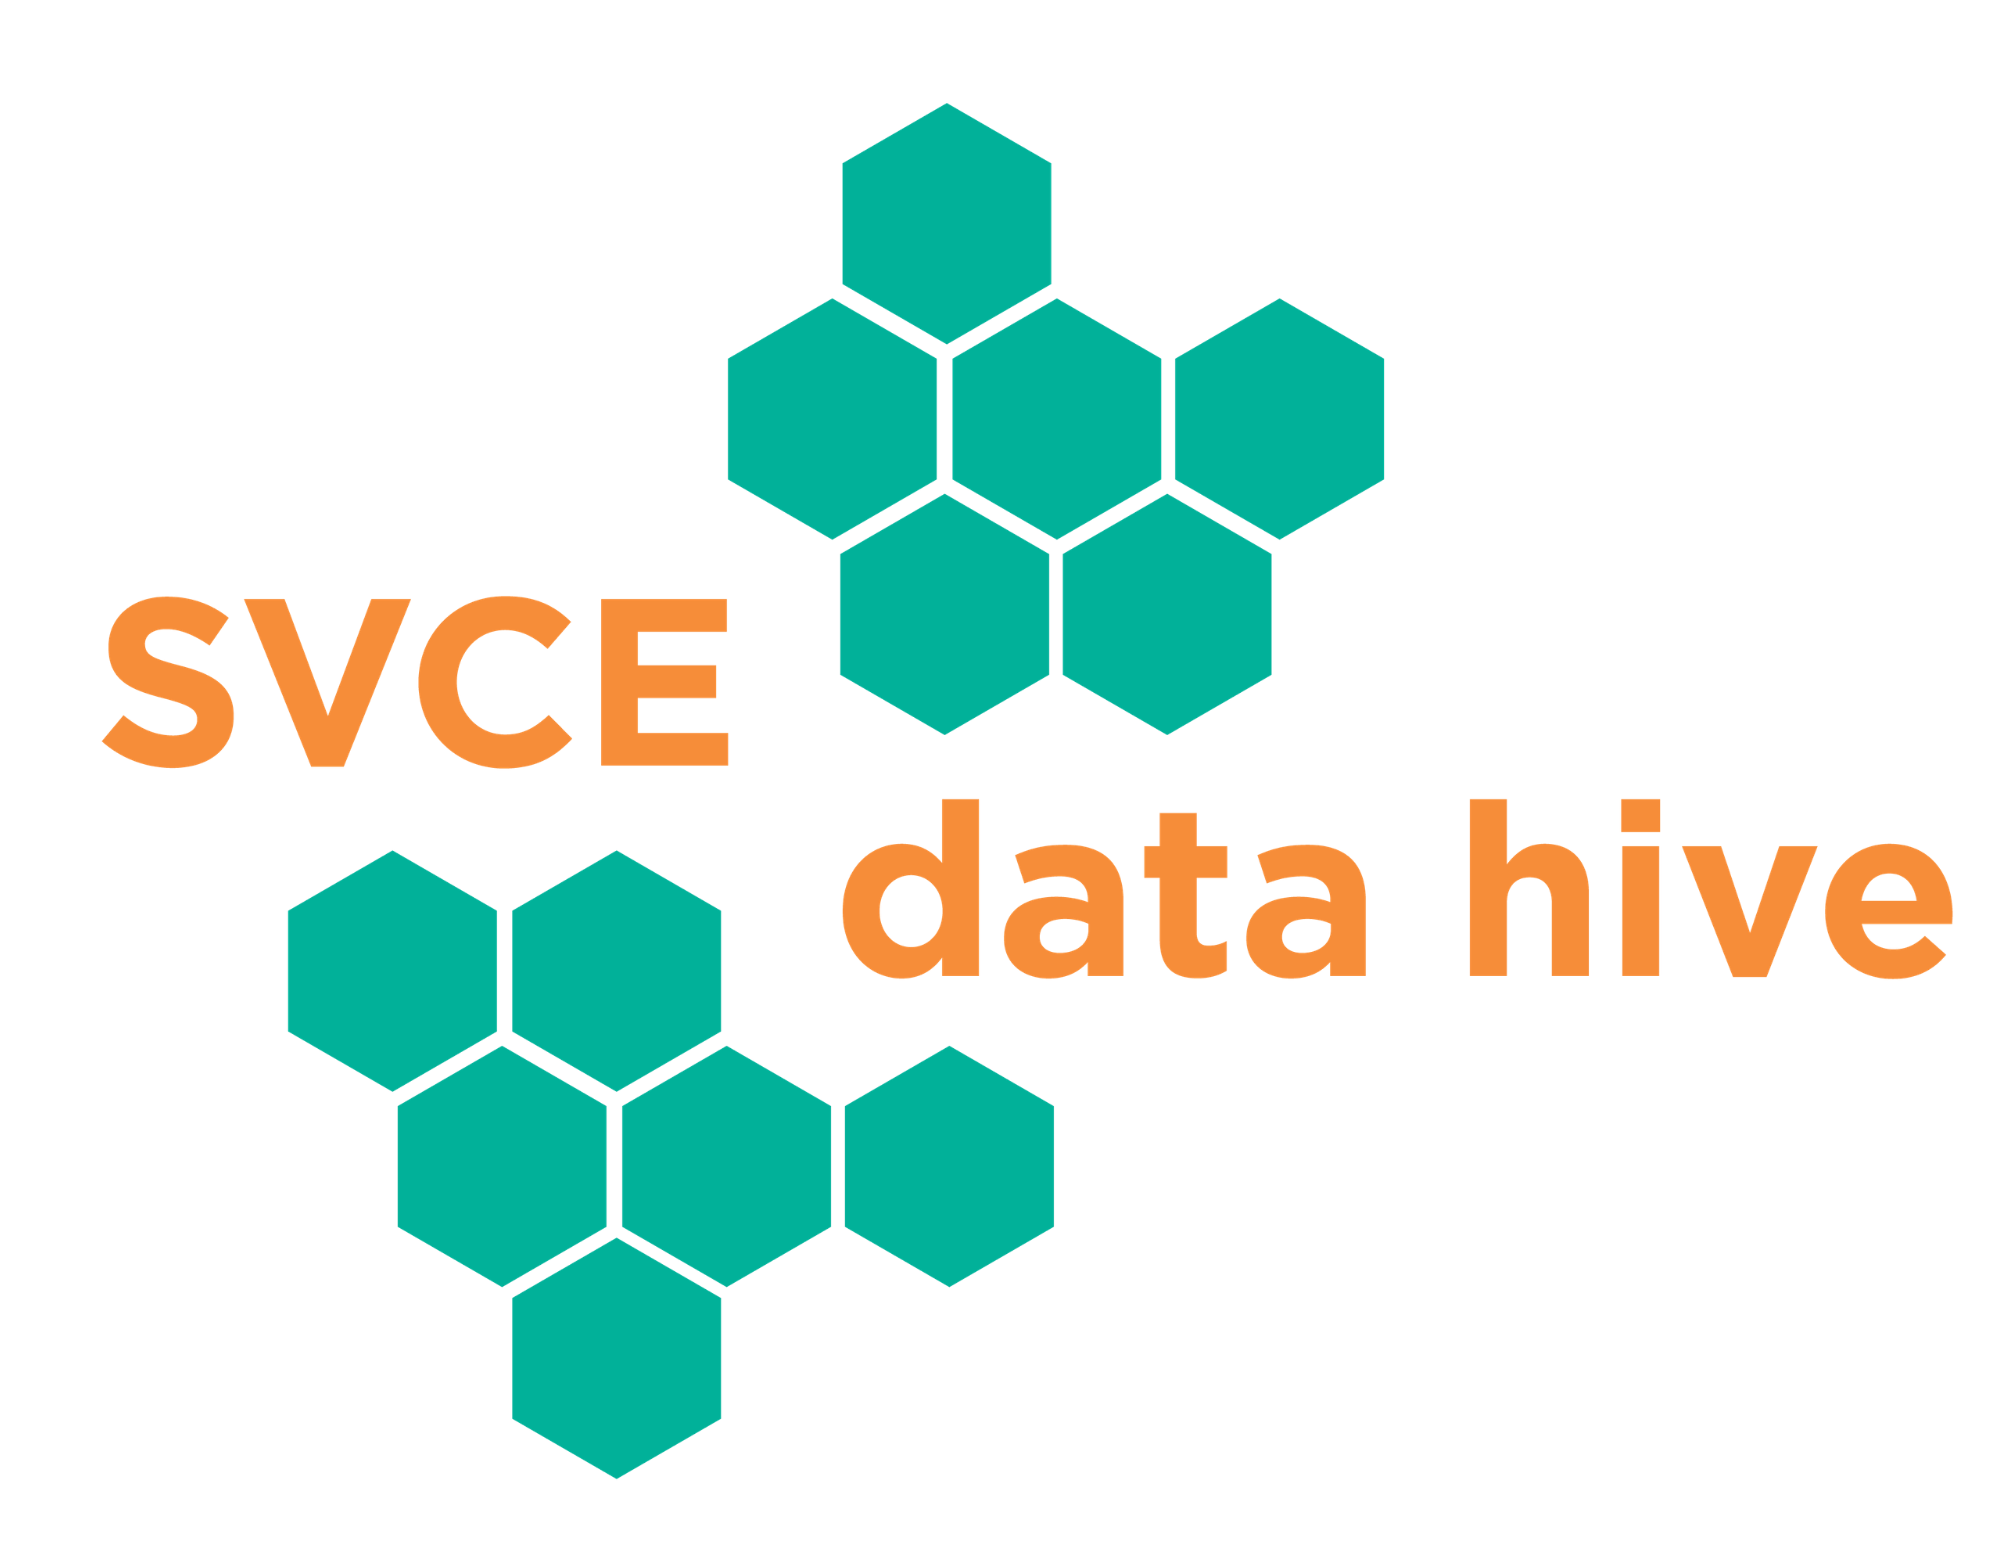 logo for the data hive